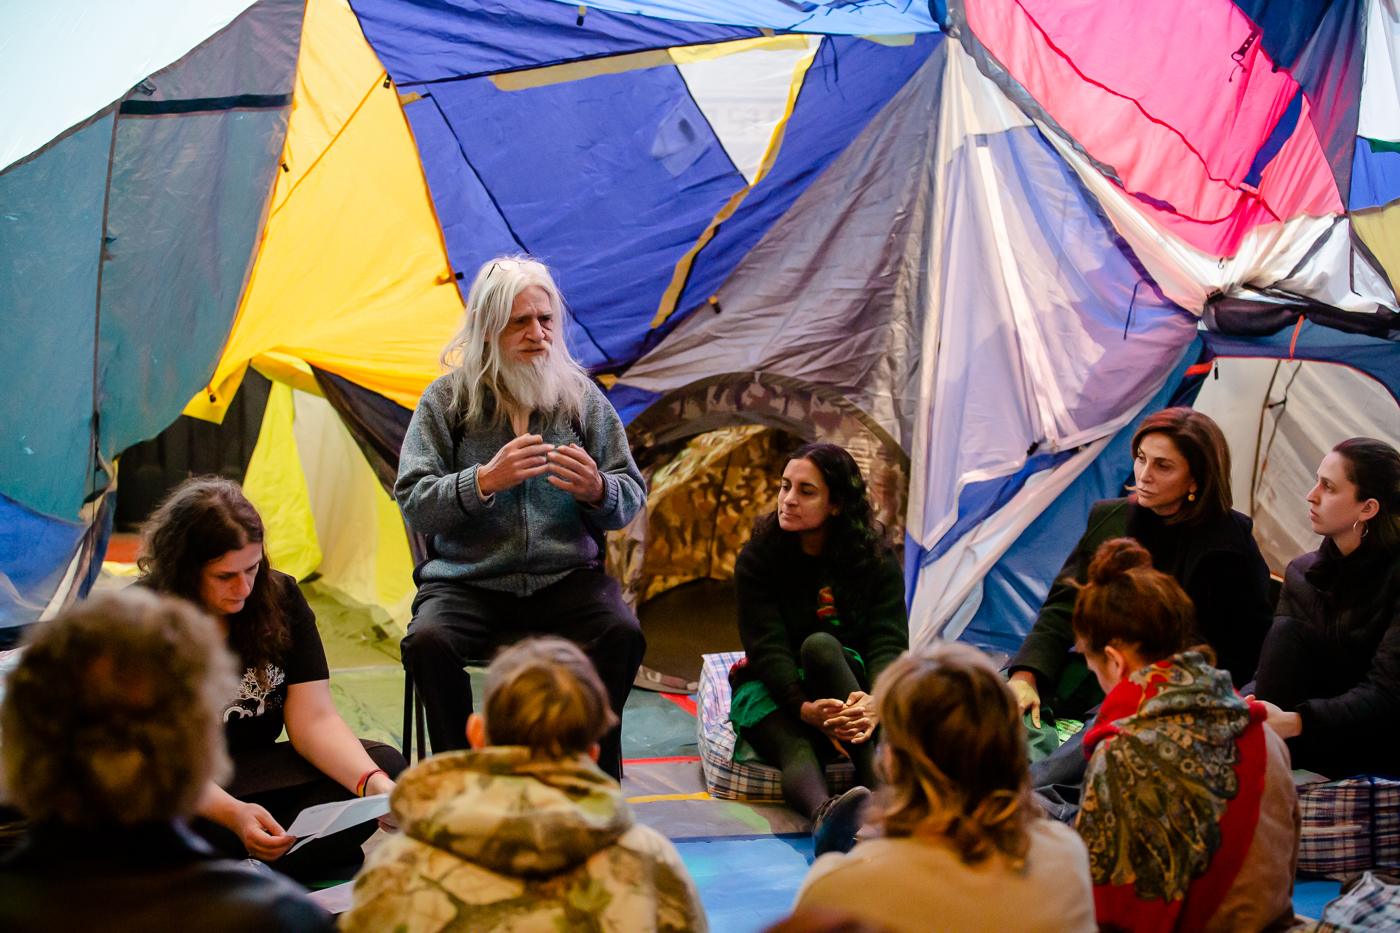 Building community over time - Uncle Larry Walsh pictured in North Melbourne School of Displacement by Keg de Souza, Refuge 2019: Displacement, Photo by Bryony Jackson.